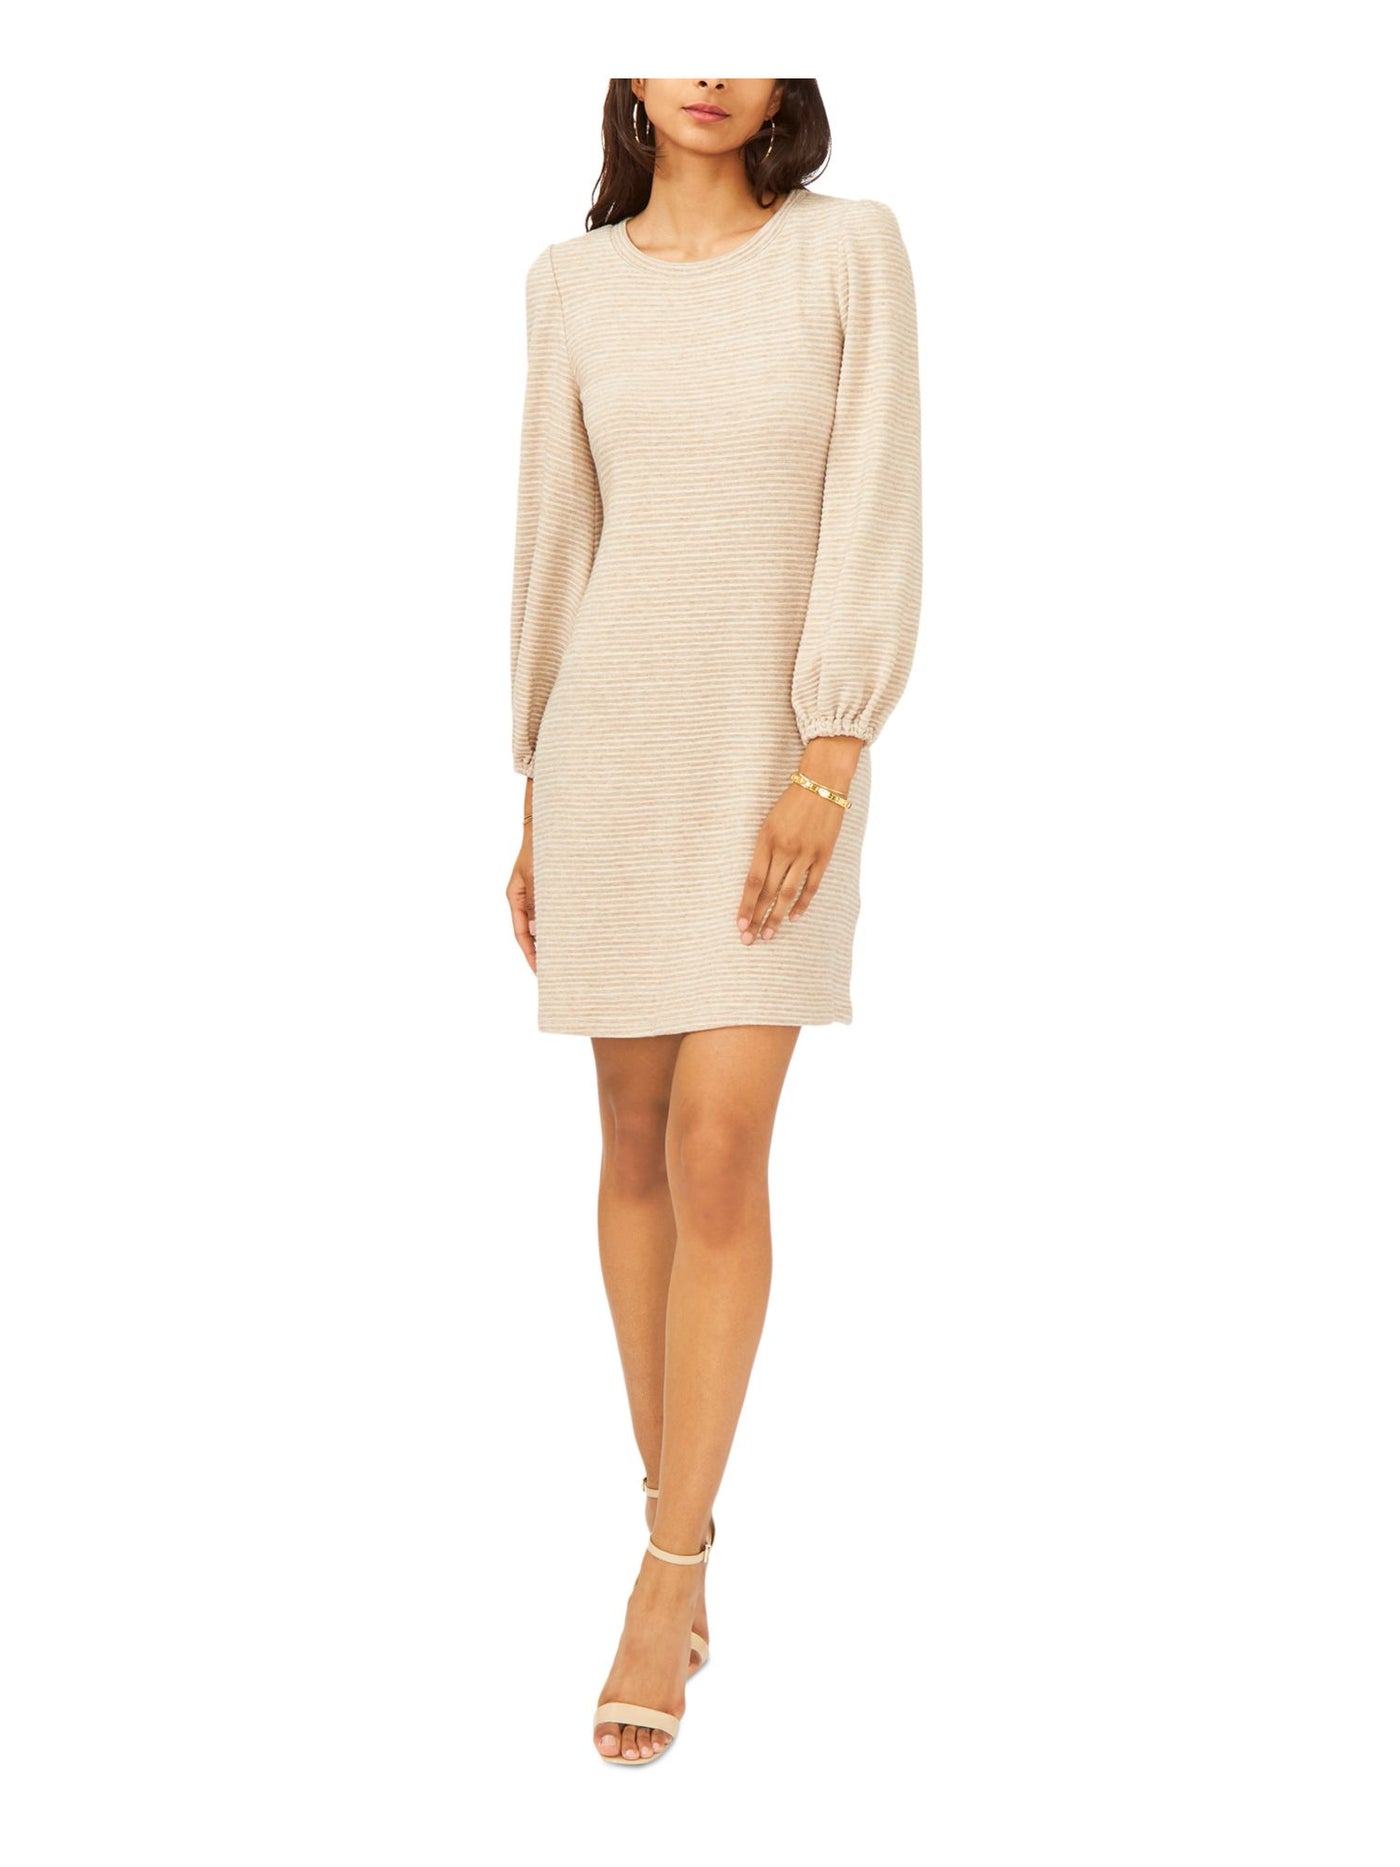 MSK PETITES Womens Beige Ribbed Long Sleeve Round Neck Above The Knee Shift Dress Petites PM